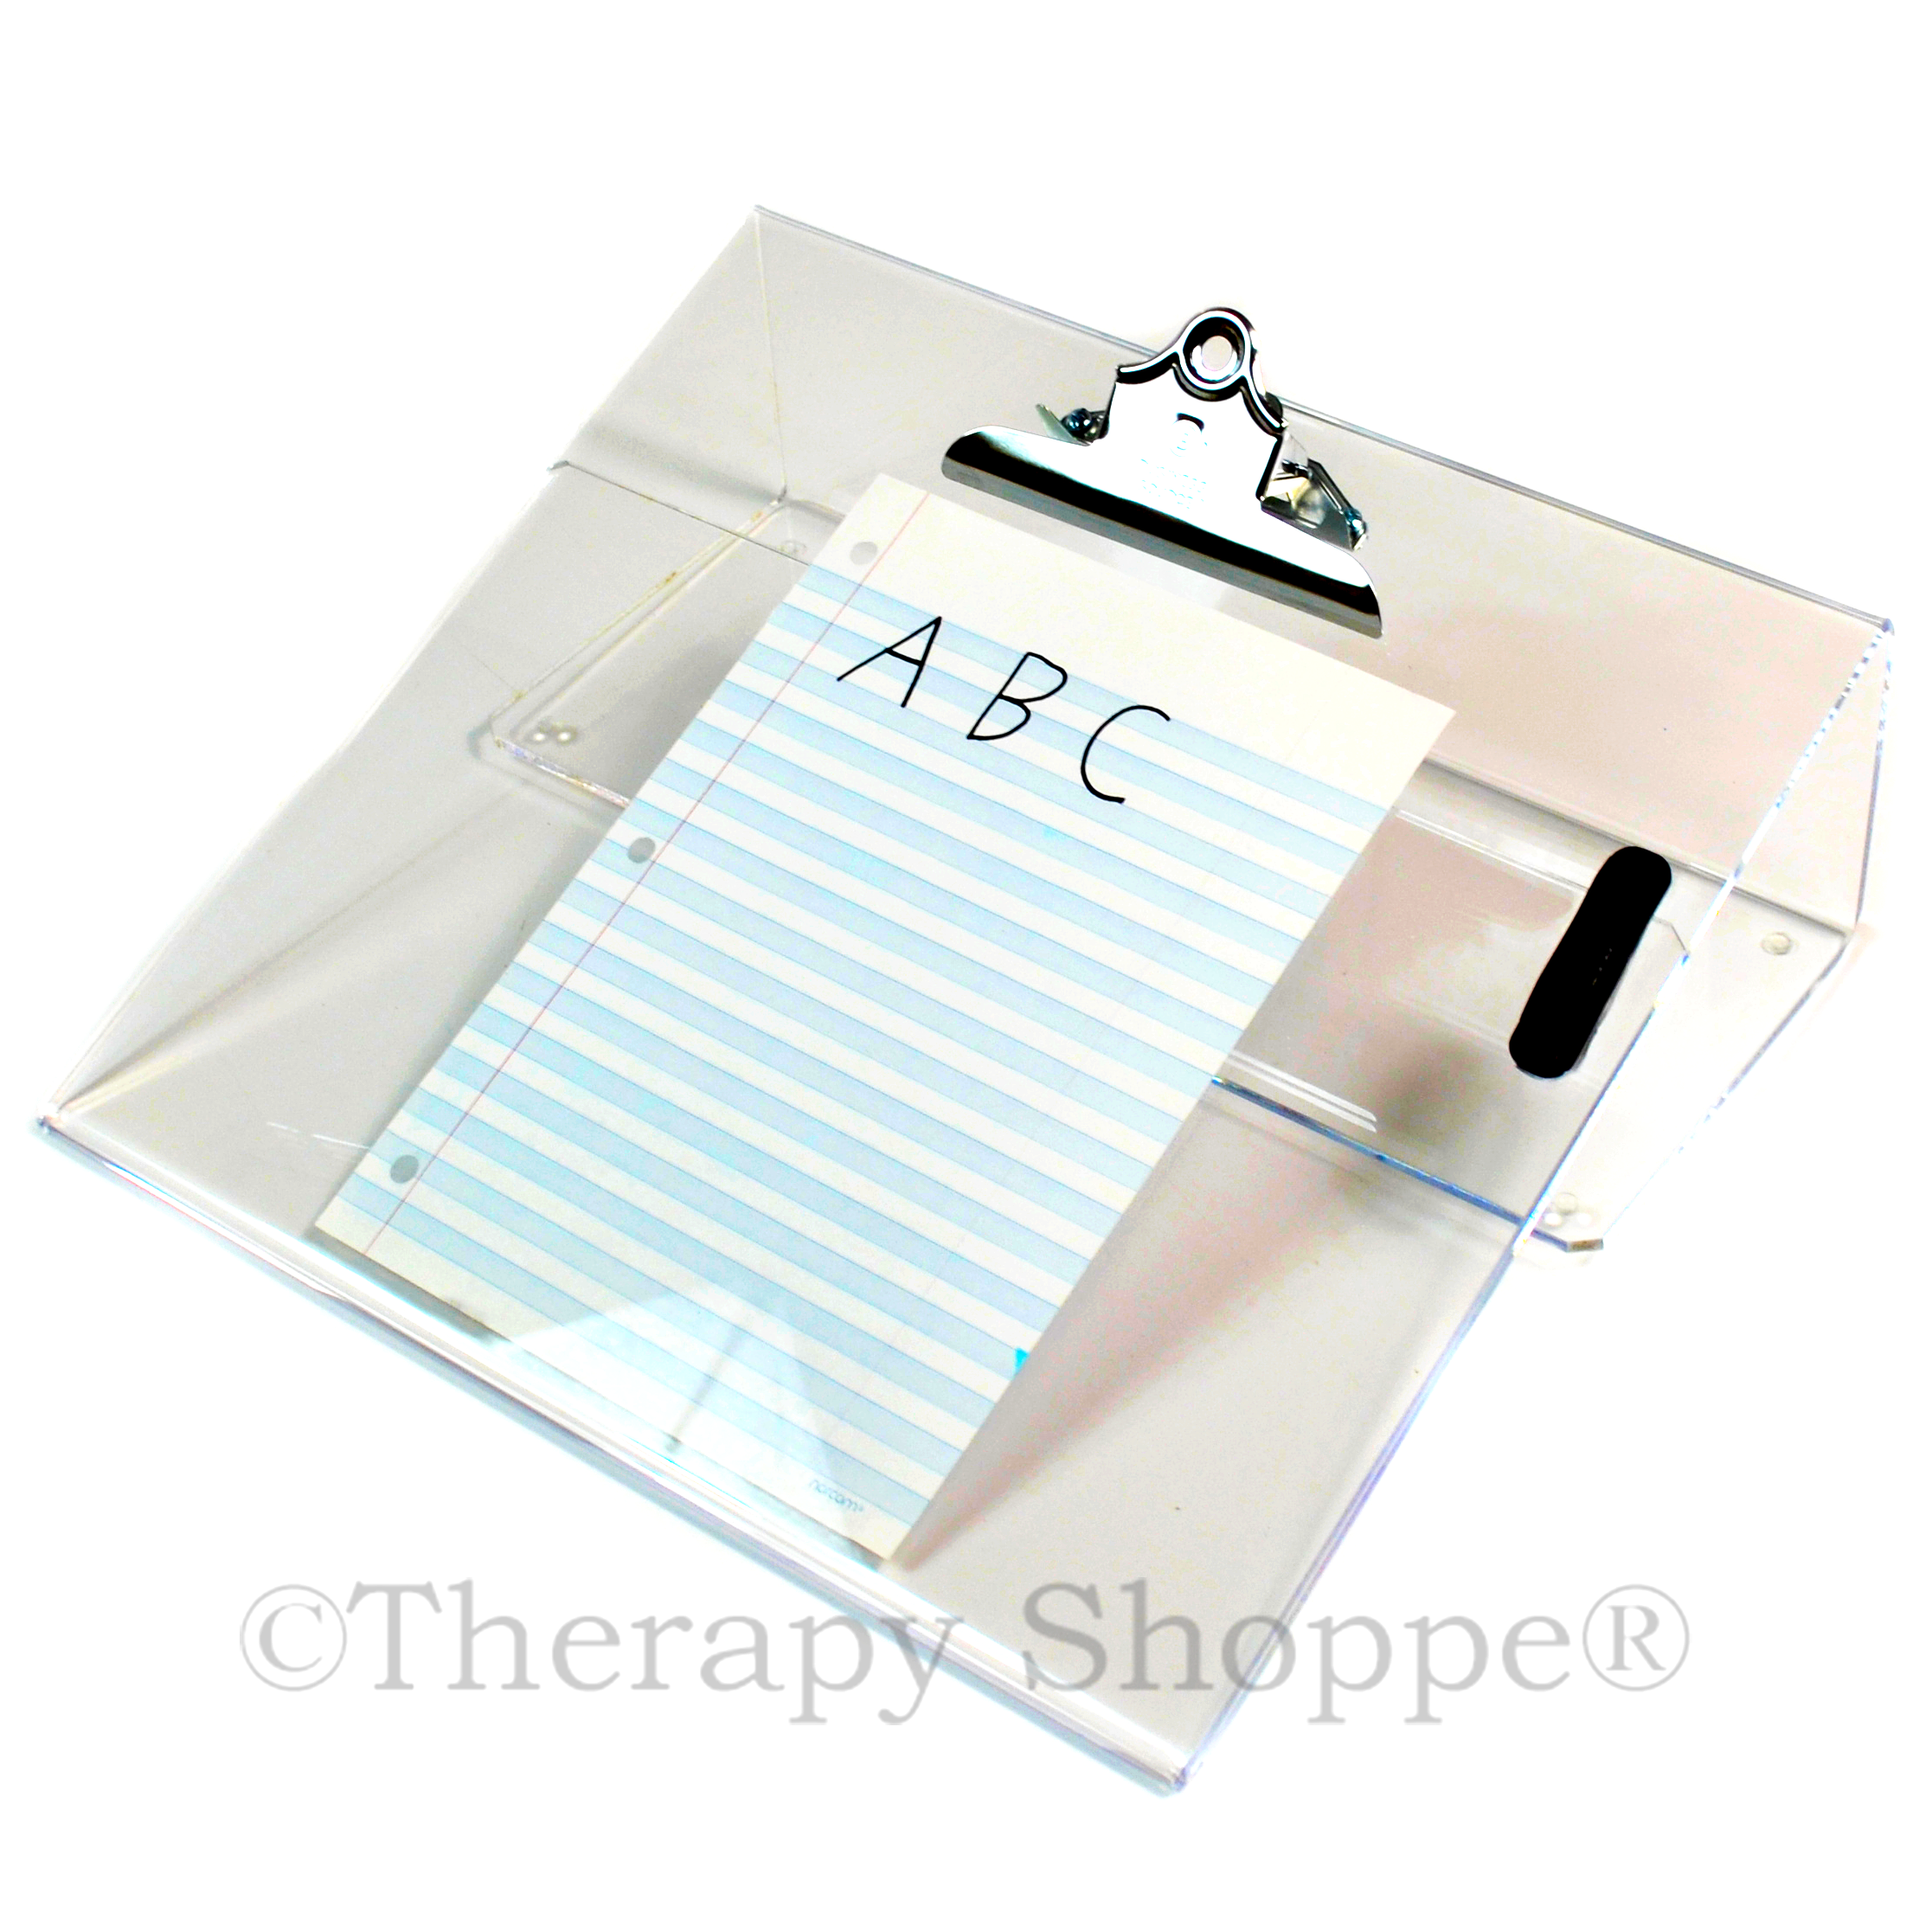 Desktop Writing Slant Boards (with a free pencil holder